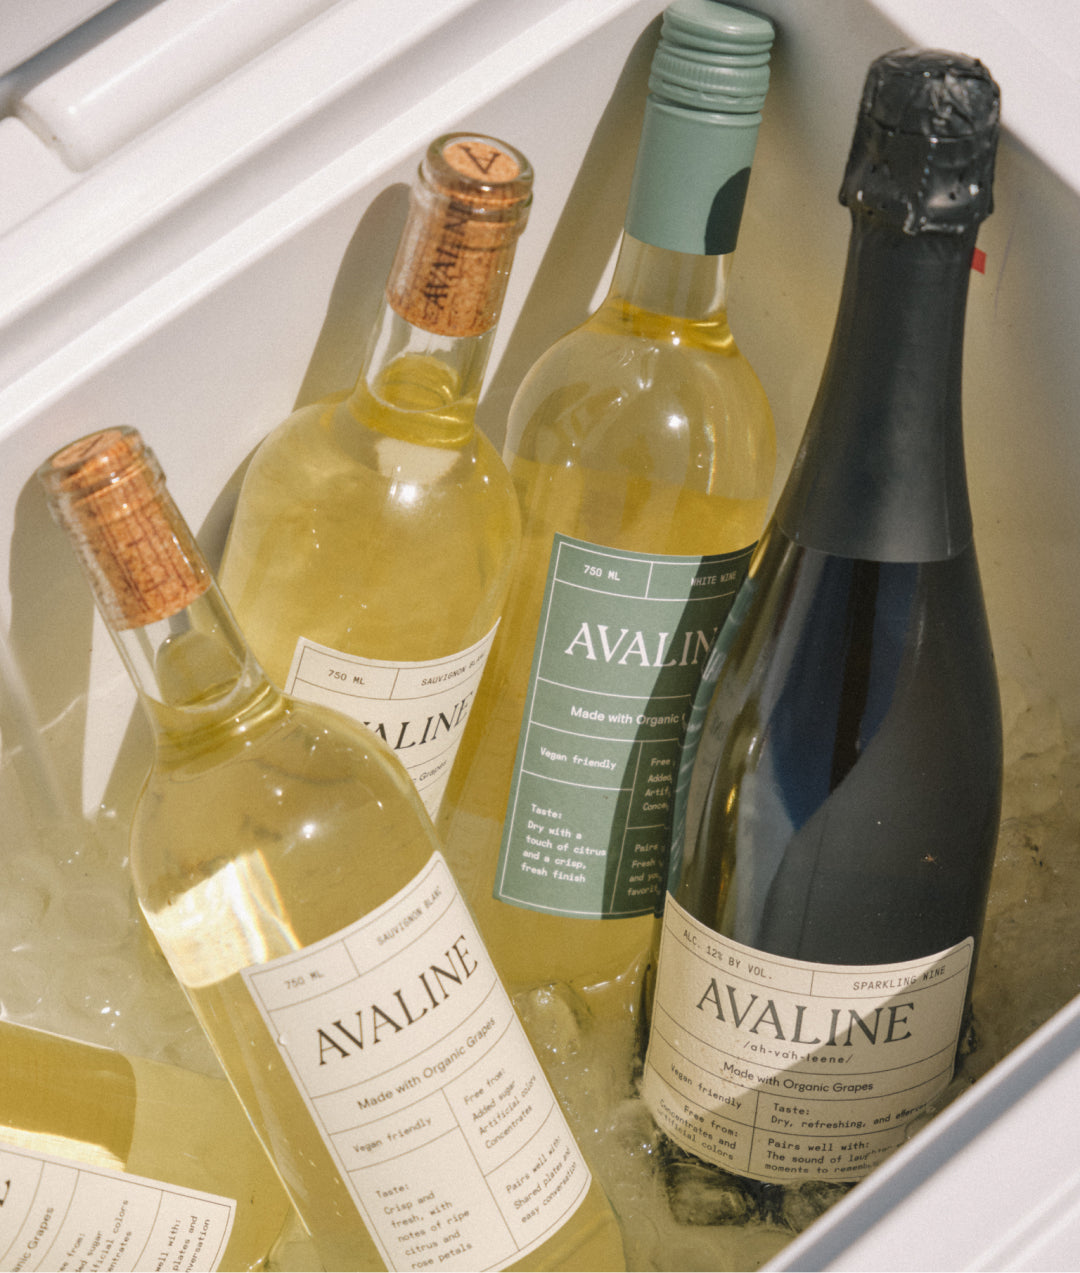 A white cooler with ice filled with bottles of Avaline White Wines including Sauvignon Blanc, White and Sparkling